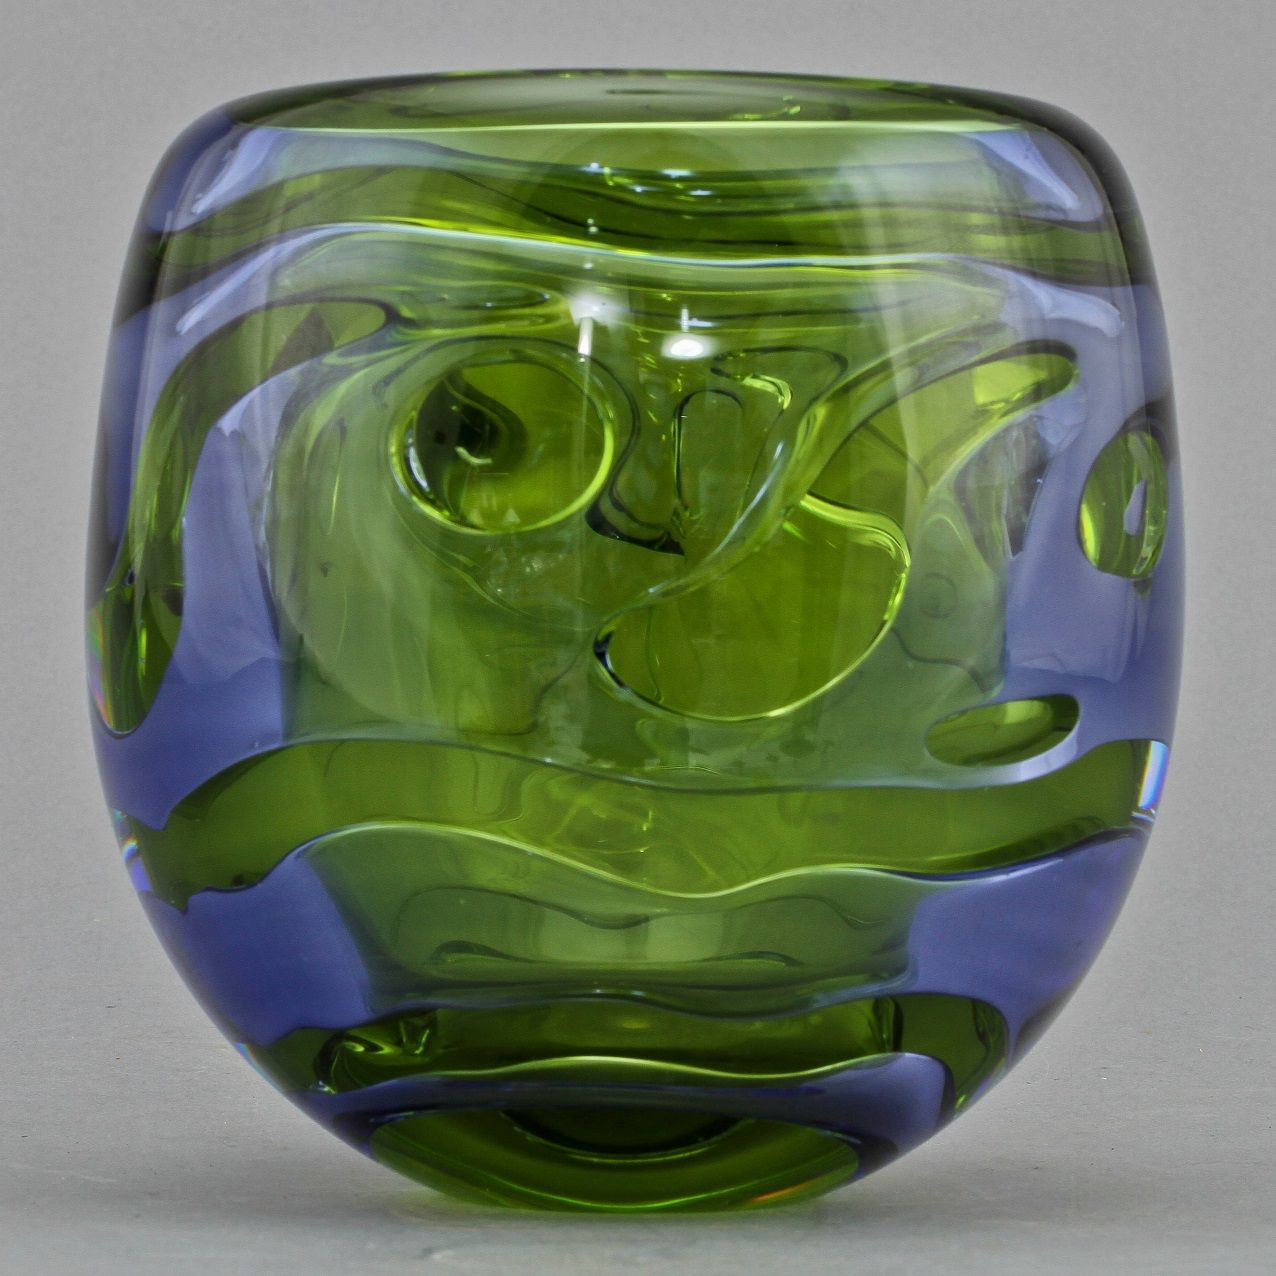 16 Unique Stained Glass Vase 2024 free download stained glass vase of bengt edenfalk swedish thalatta glass vase swedish pinterest within bengt edenfalk swedish thalatta glass vase